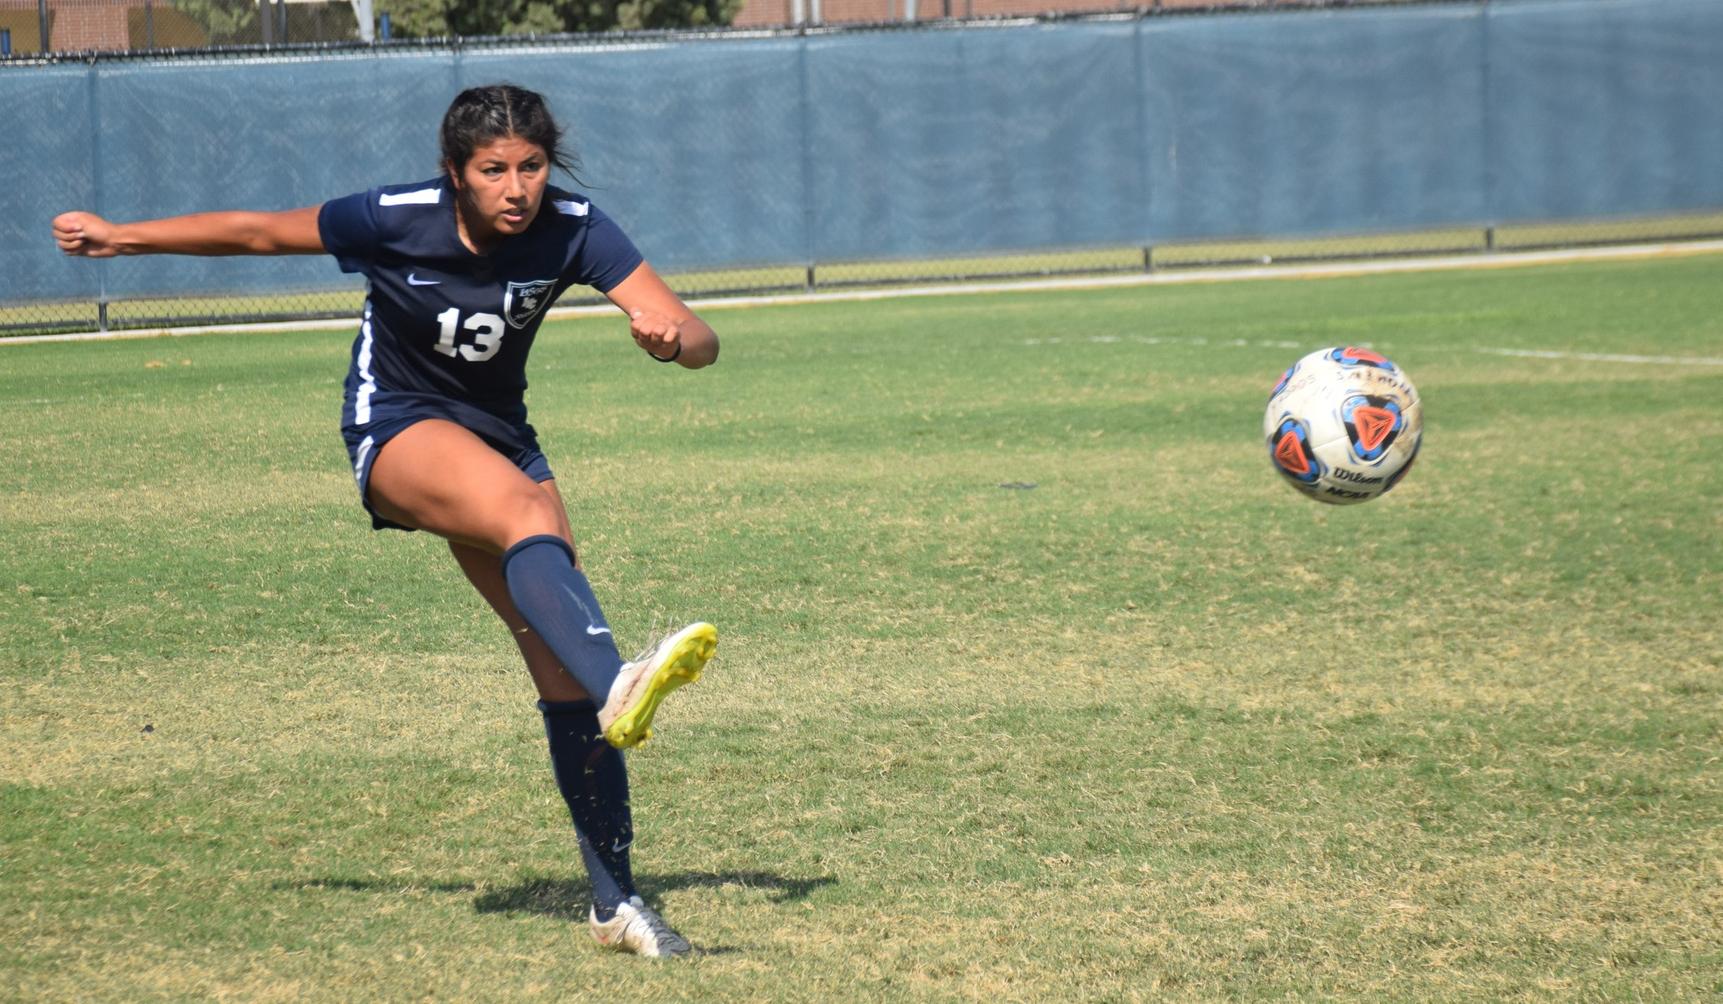 Women's soccer team gets shut out at El Camino